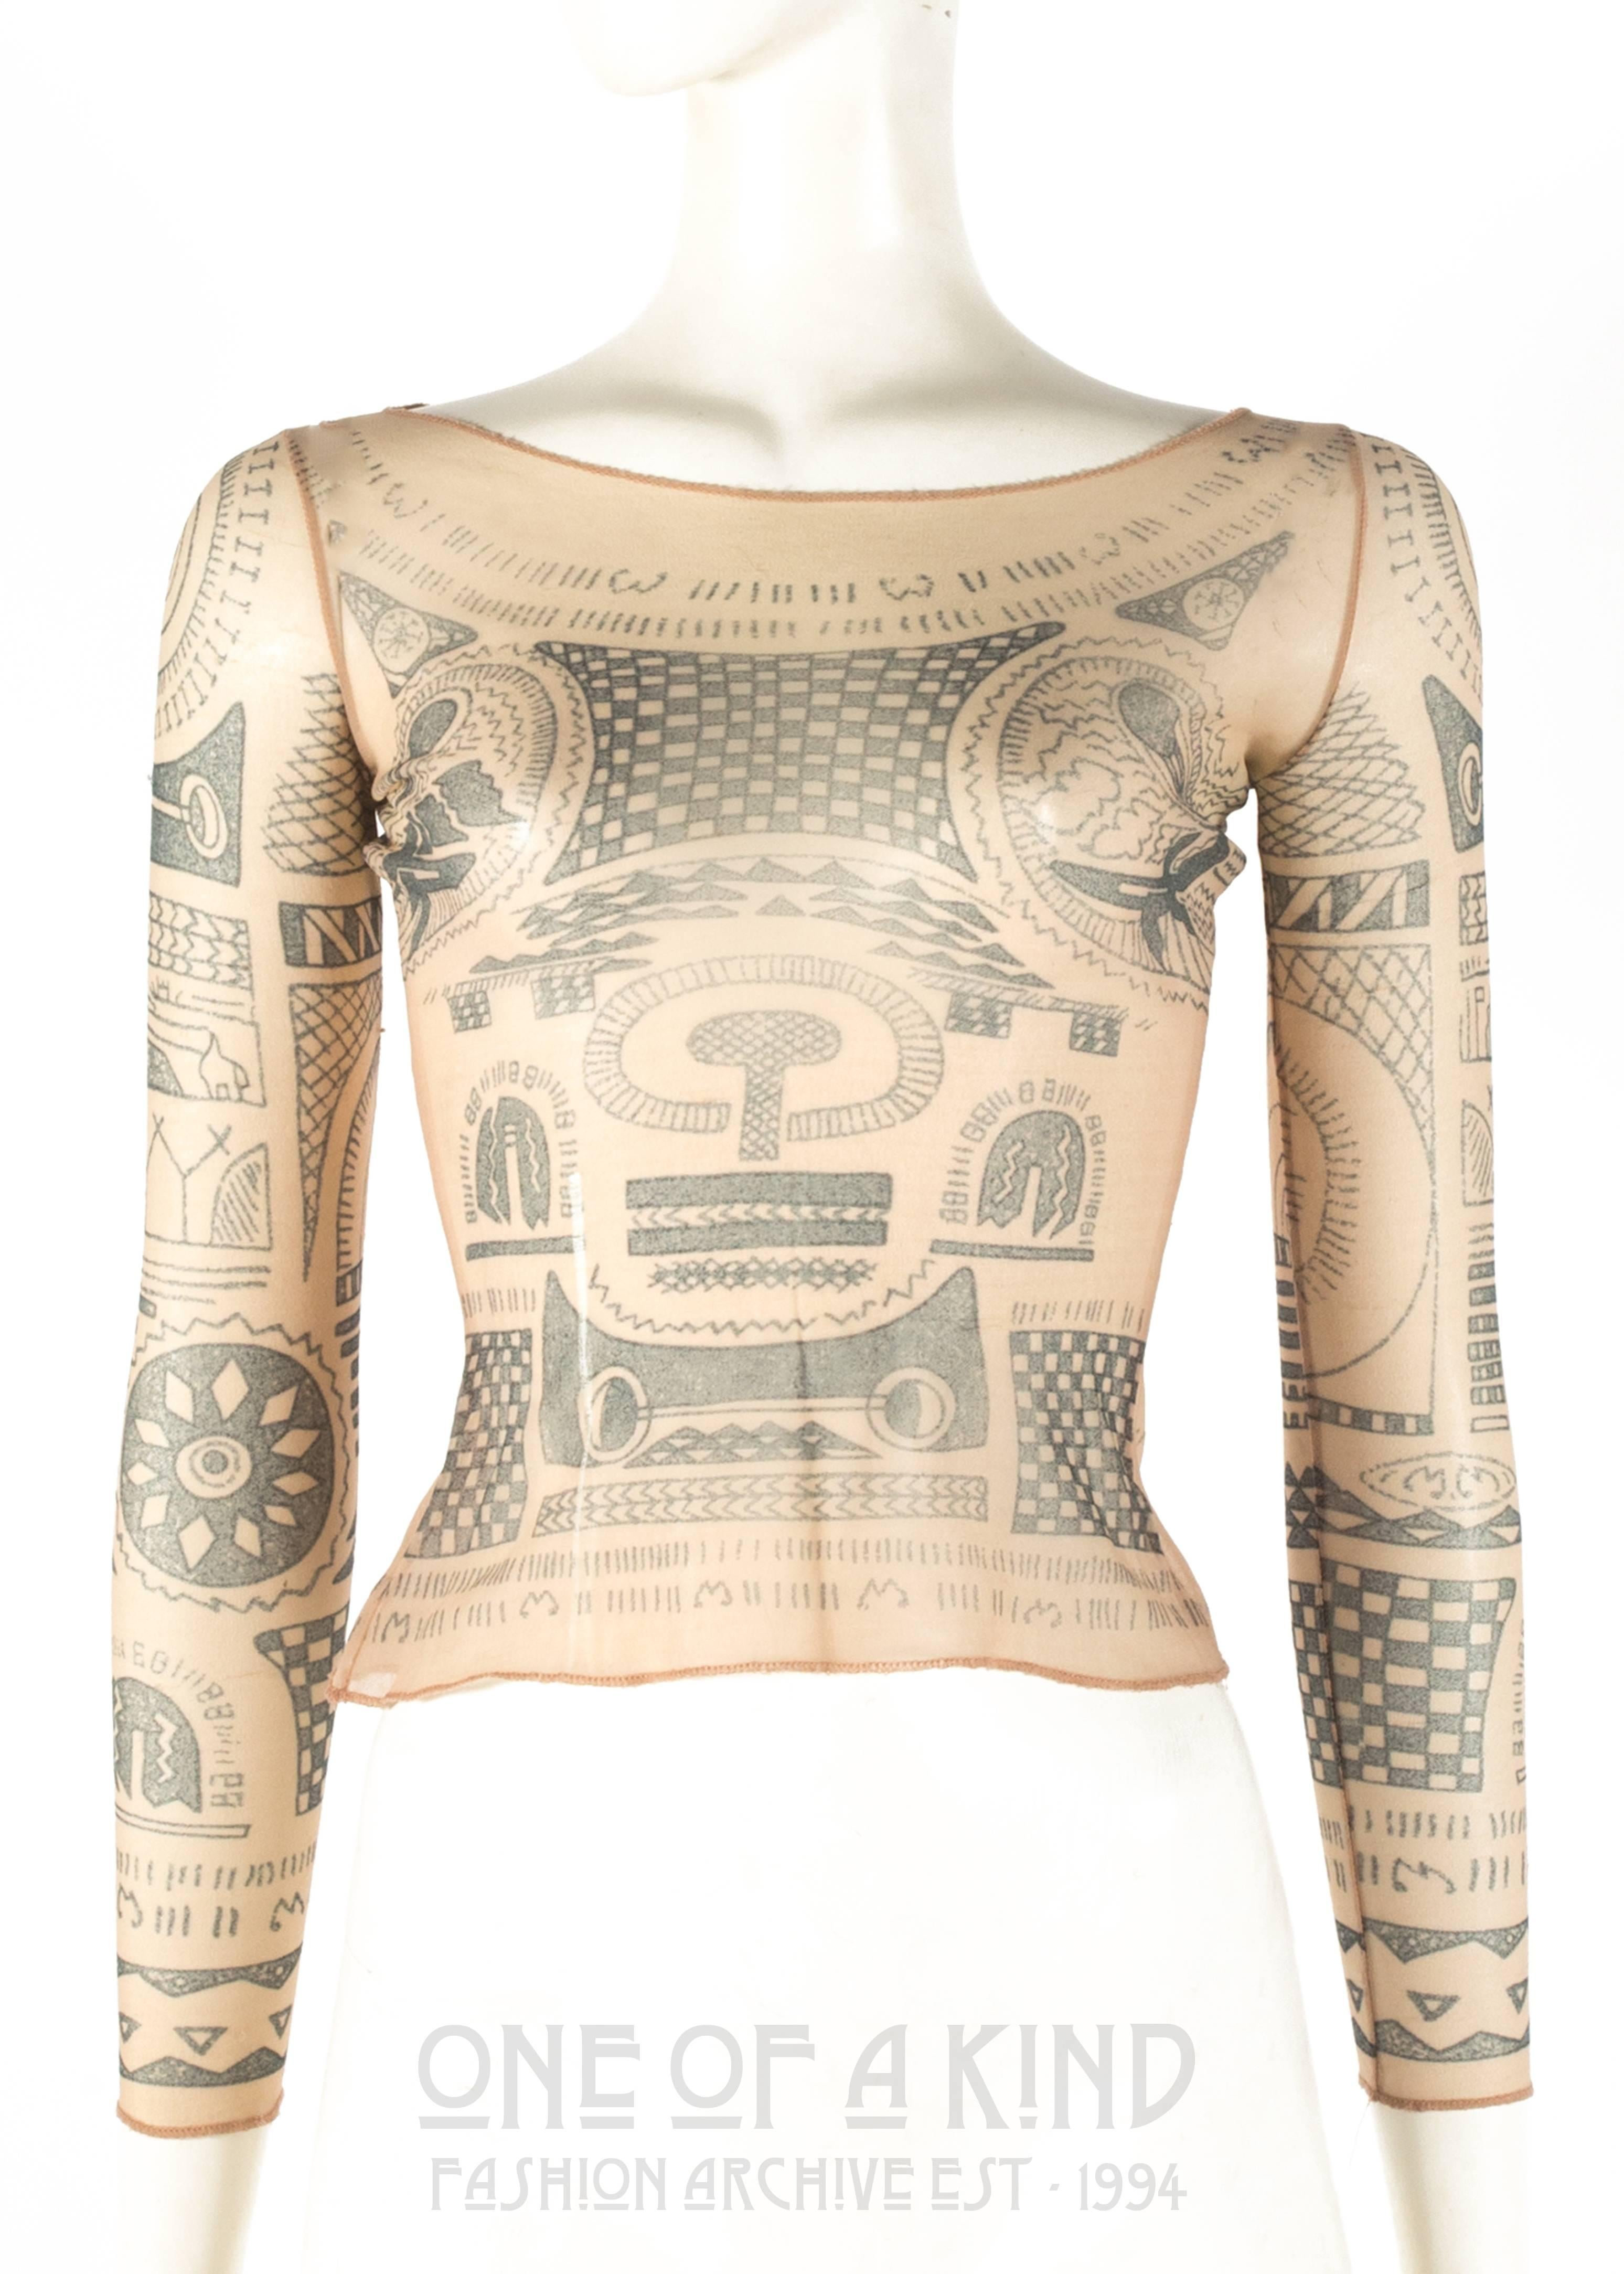 Margiela Spring-Summer 1989 trompe-l'œil tattoo mesh top 

* collectors item, from Martin Margiela's first collection 